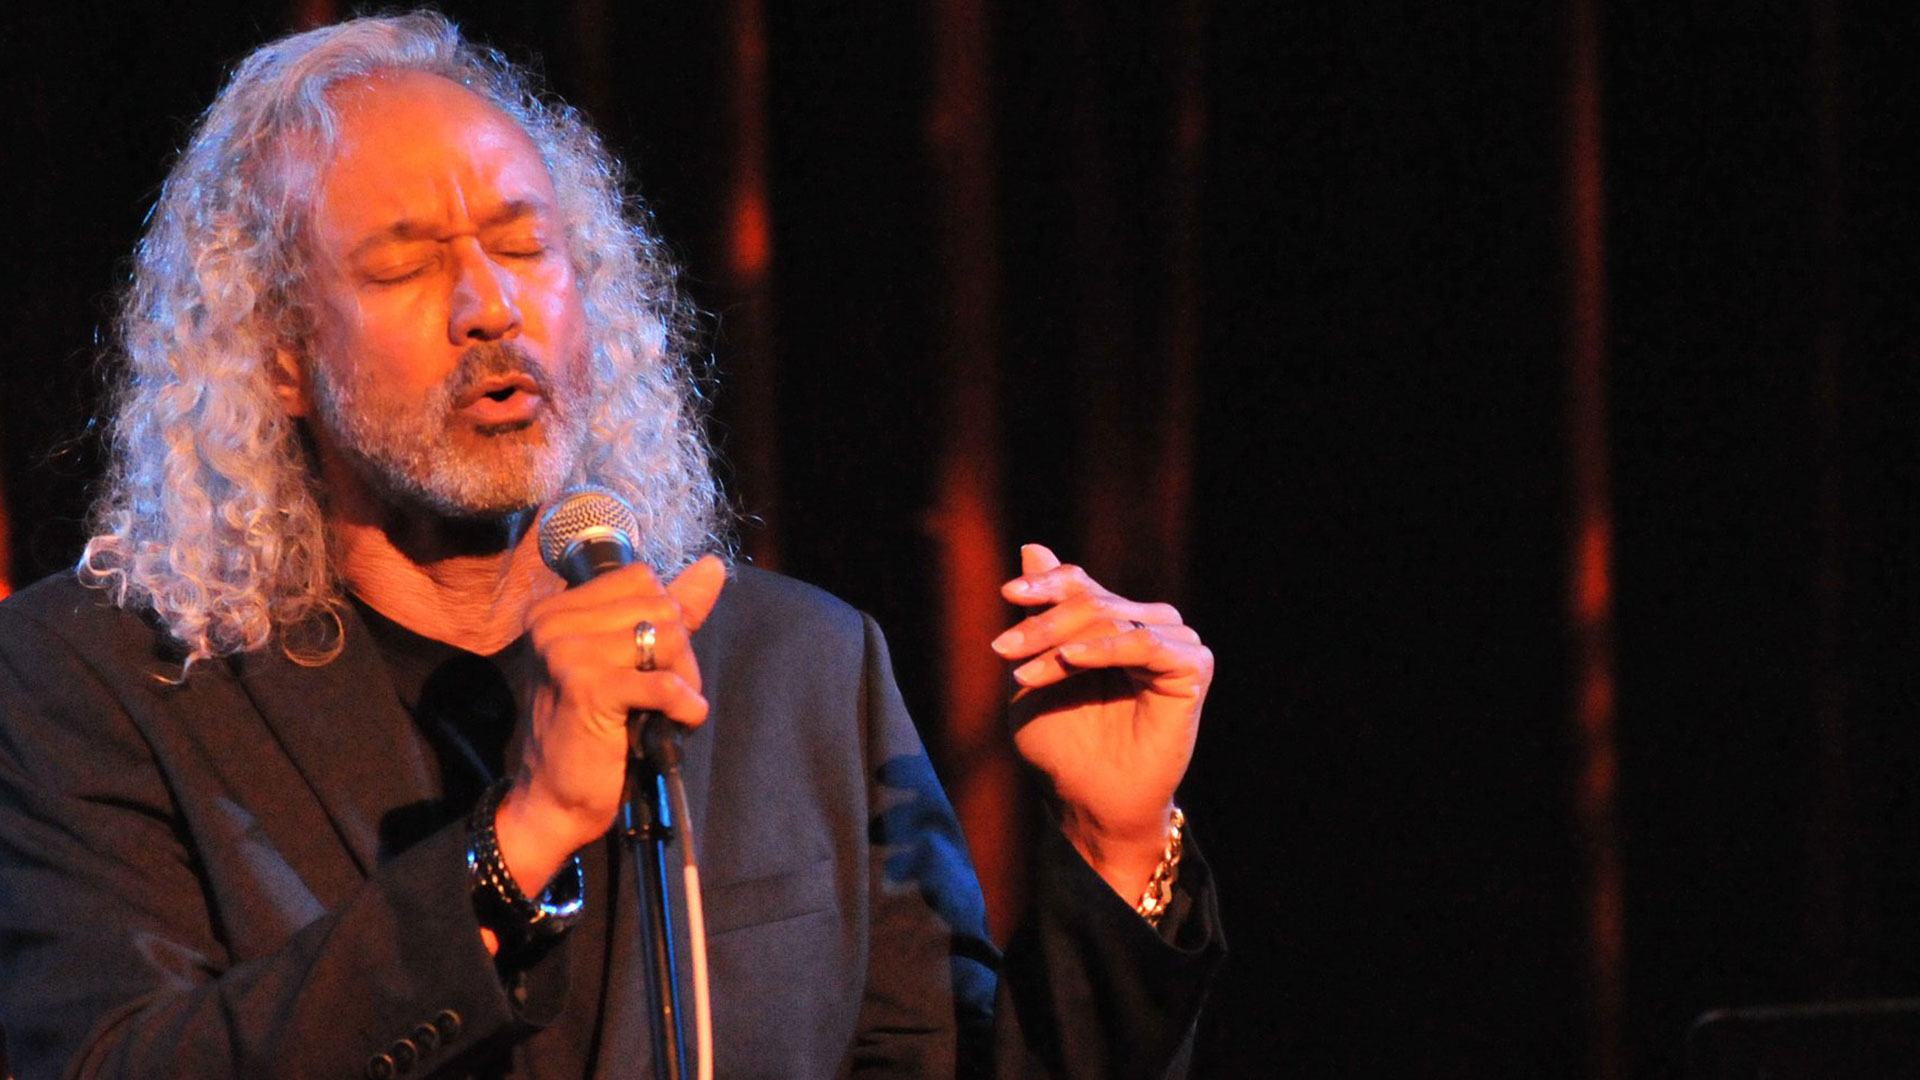 A man with curly hair and beard holding a microphone.